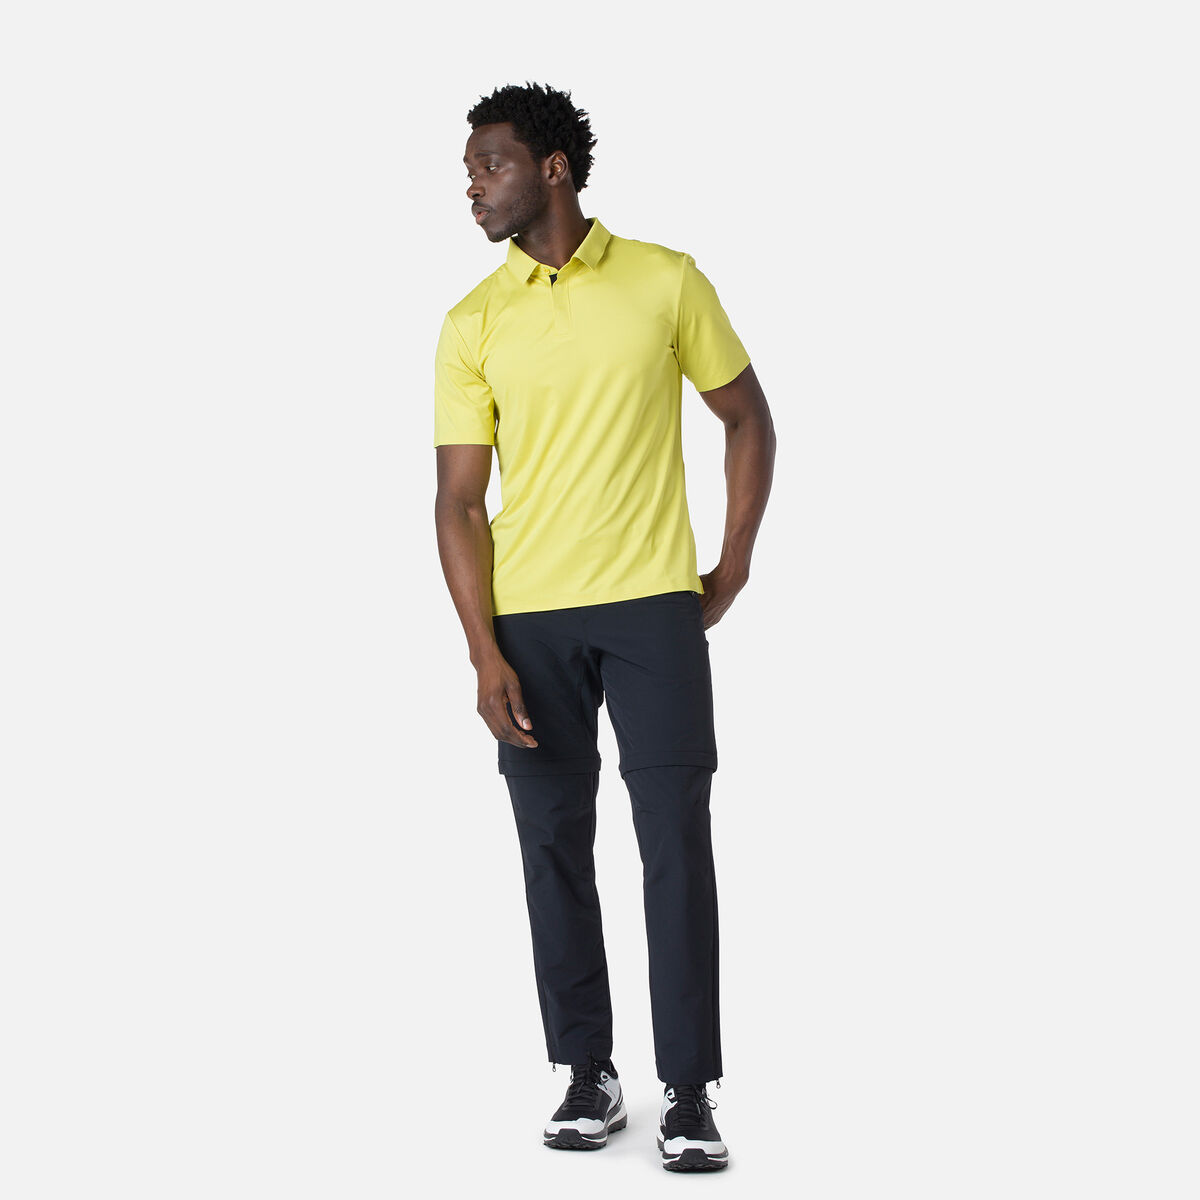 Men's lightweight breathable polo shirt